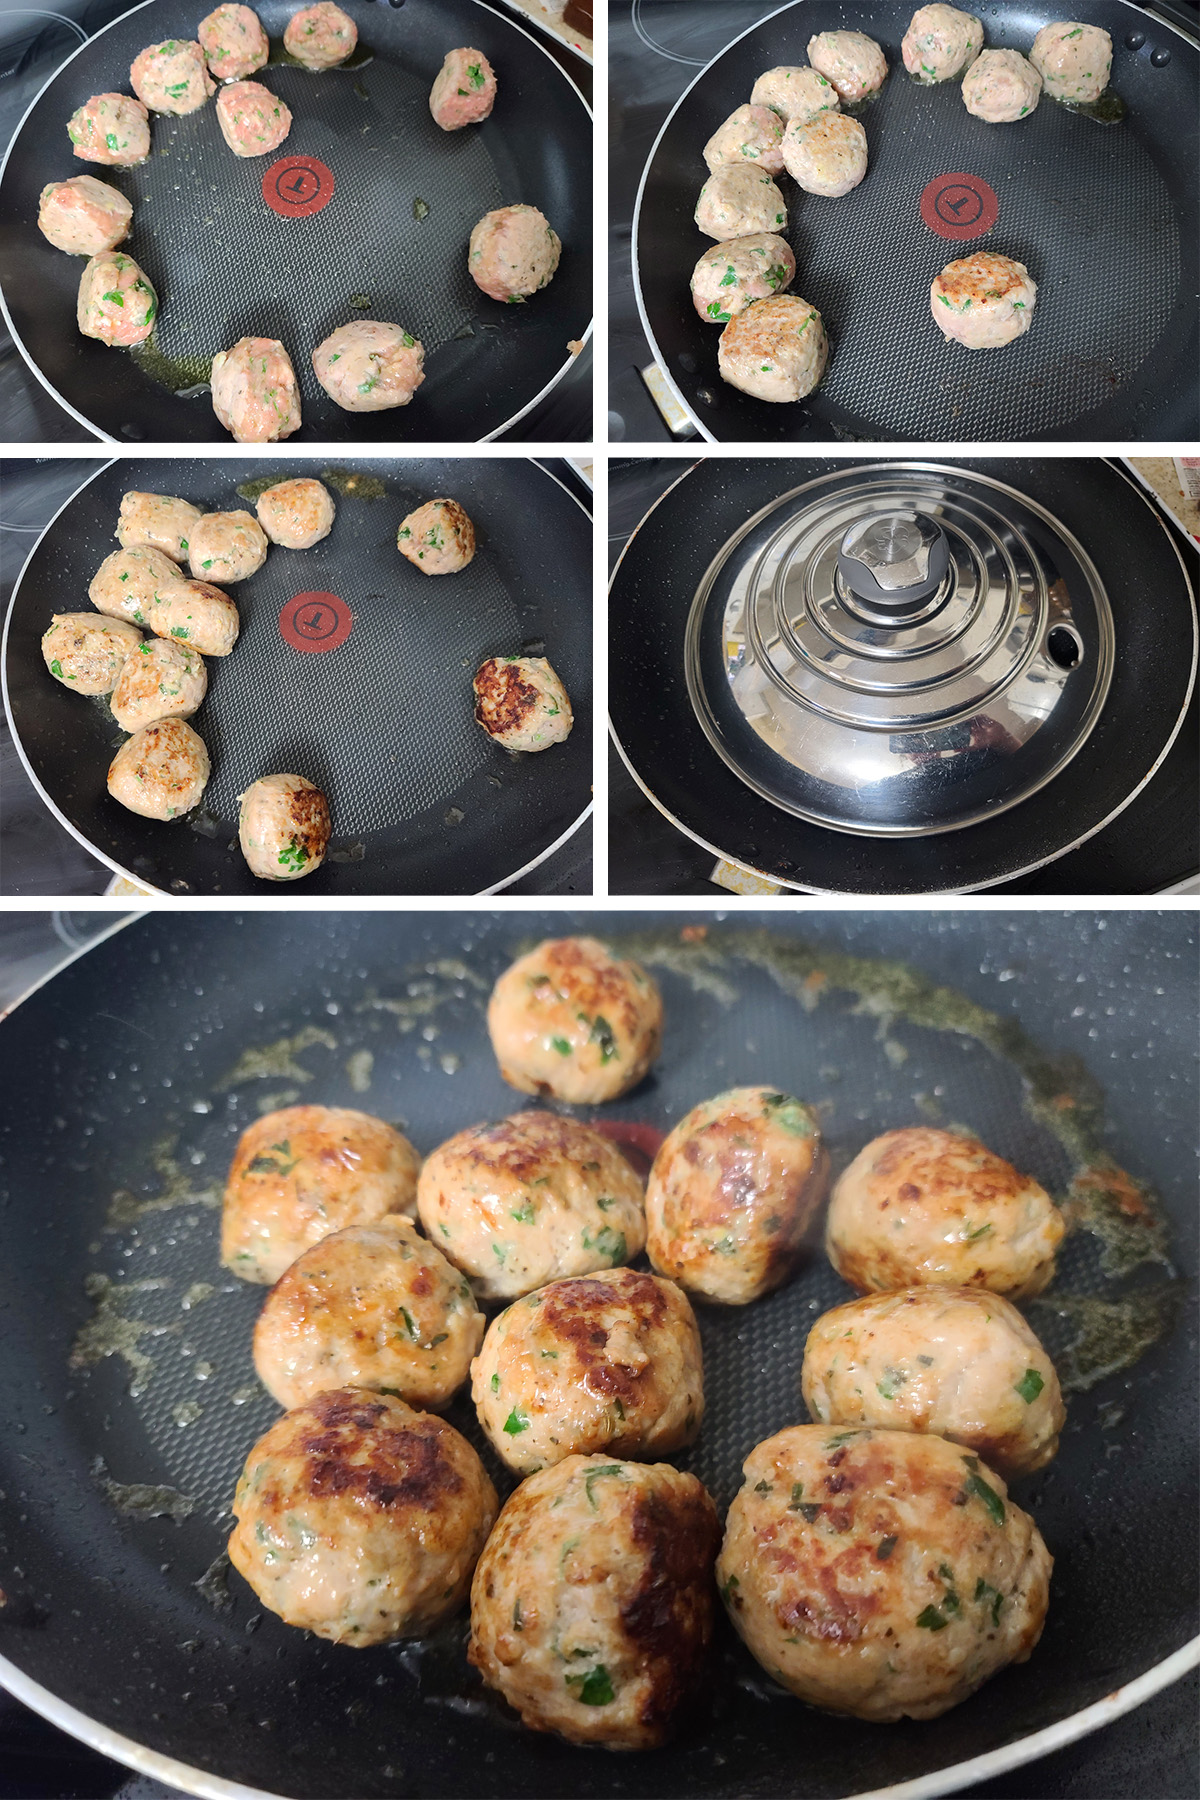 A 5 part image showning the meatballs being cooked.